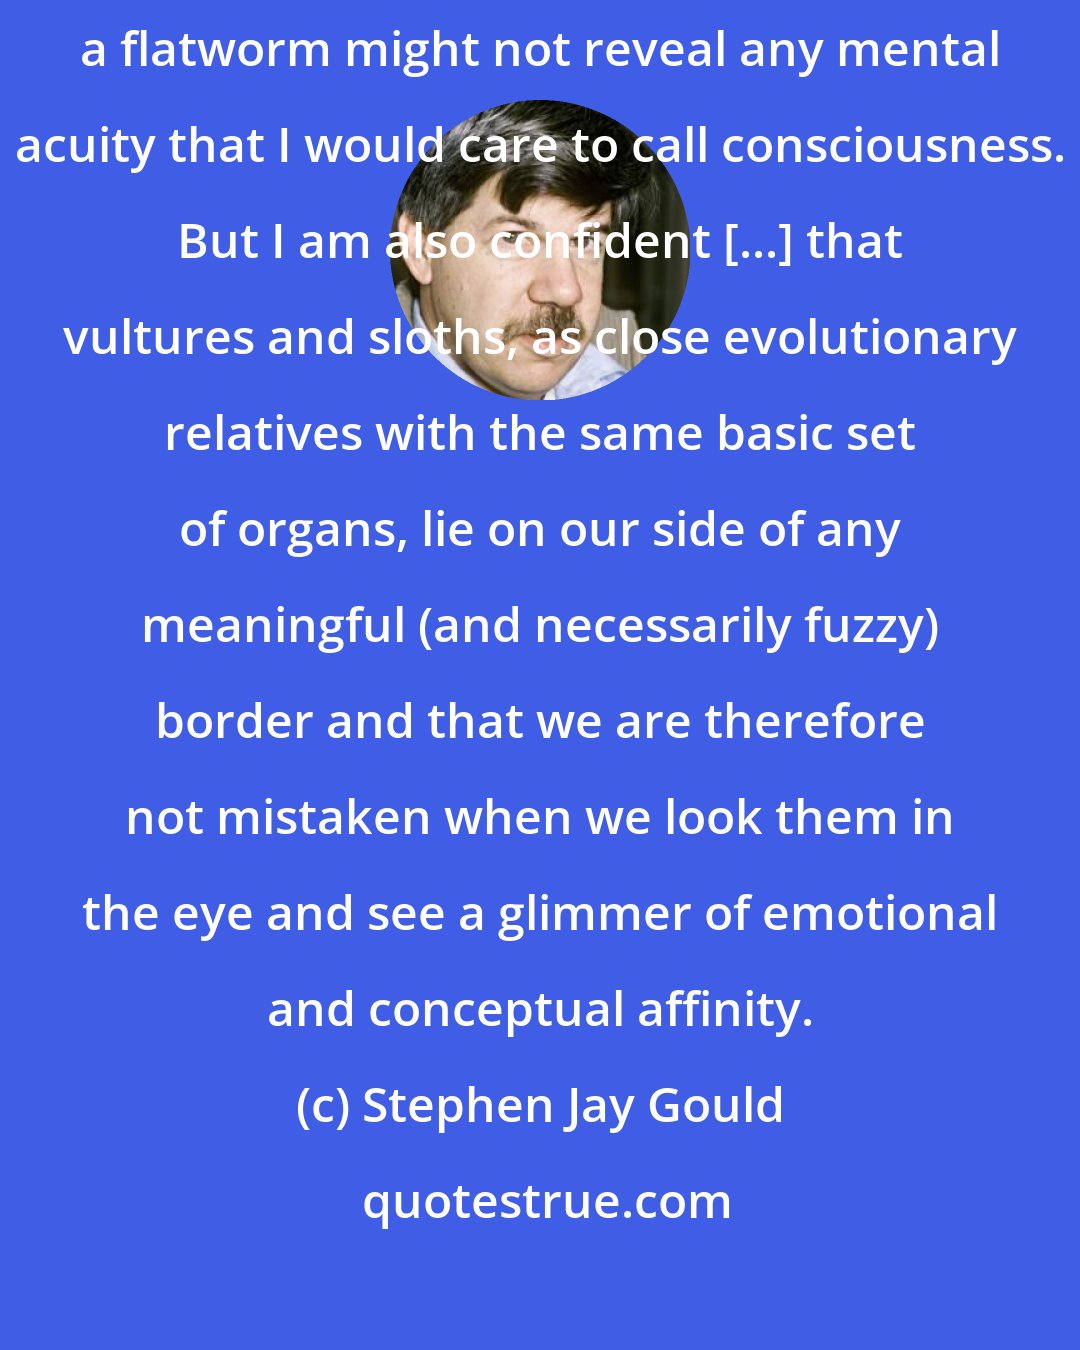 Stephen Jay Gould: I am willing to believe that my unobtainable sixty seconds within a sponge or a flatworm might not reveal any mental acuity that I would care to call consciousness. But I am also confident [...] that vultures and sloths, as close evolutionary relatives with the same basic set of organs, lie on our side of any meaningful (and necessarily fuzzy) border and that we are therefore not mistaken when we look them in the eye and see a glimmer of emotional and conceptual affinity.